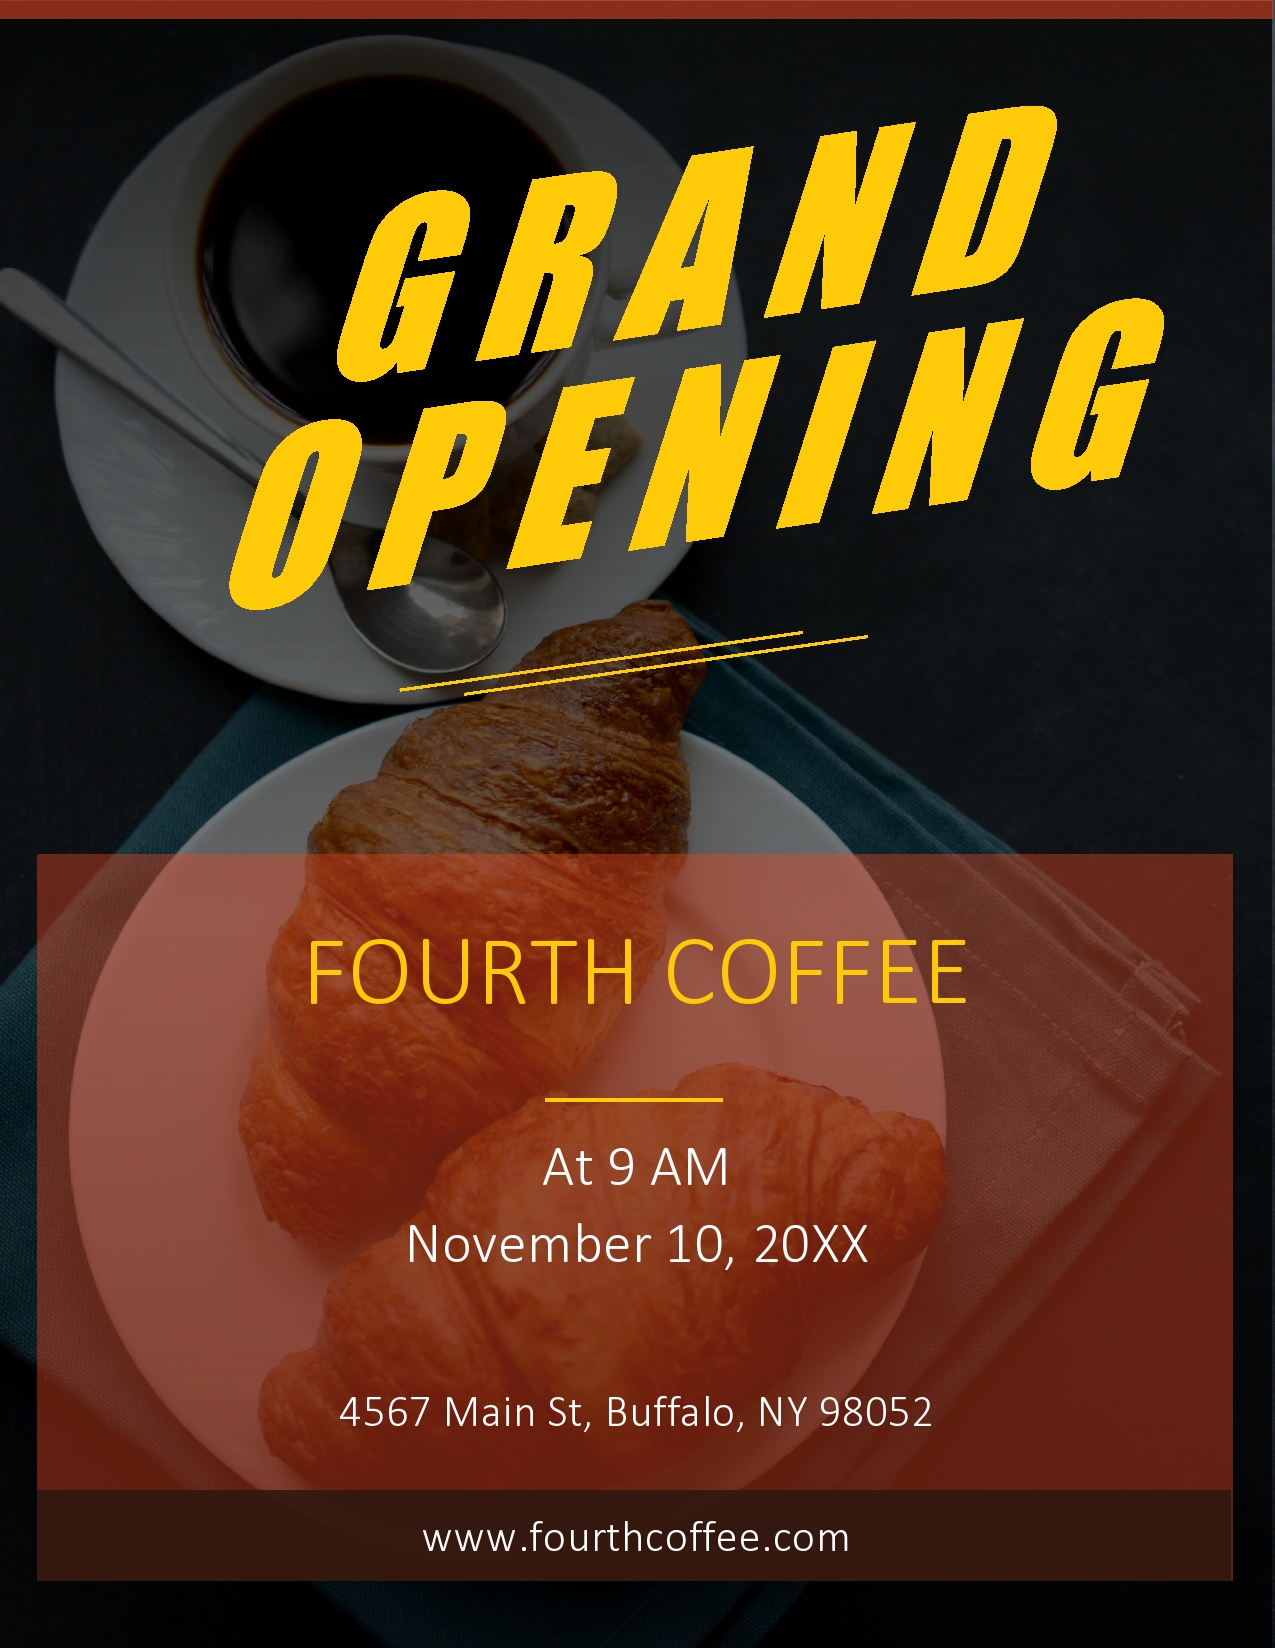 Free grand opening flyer 01